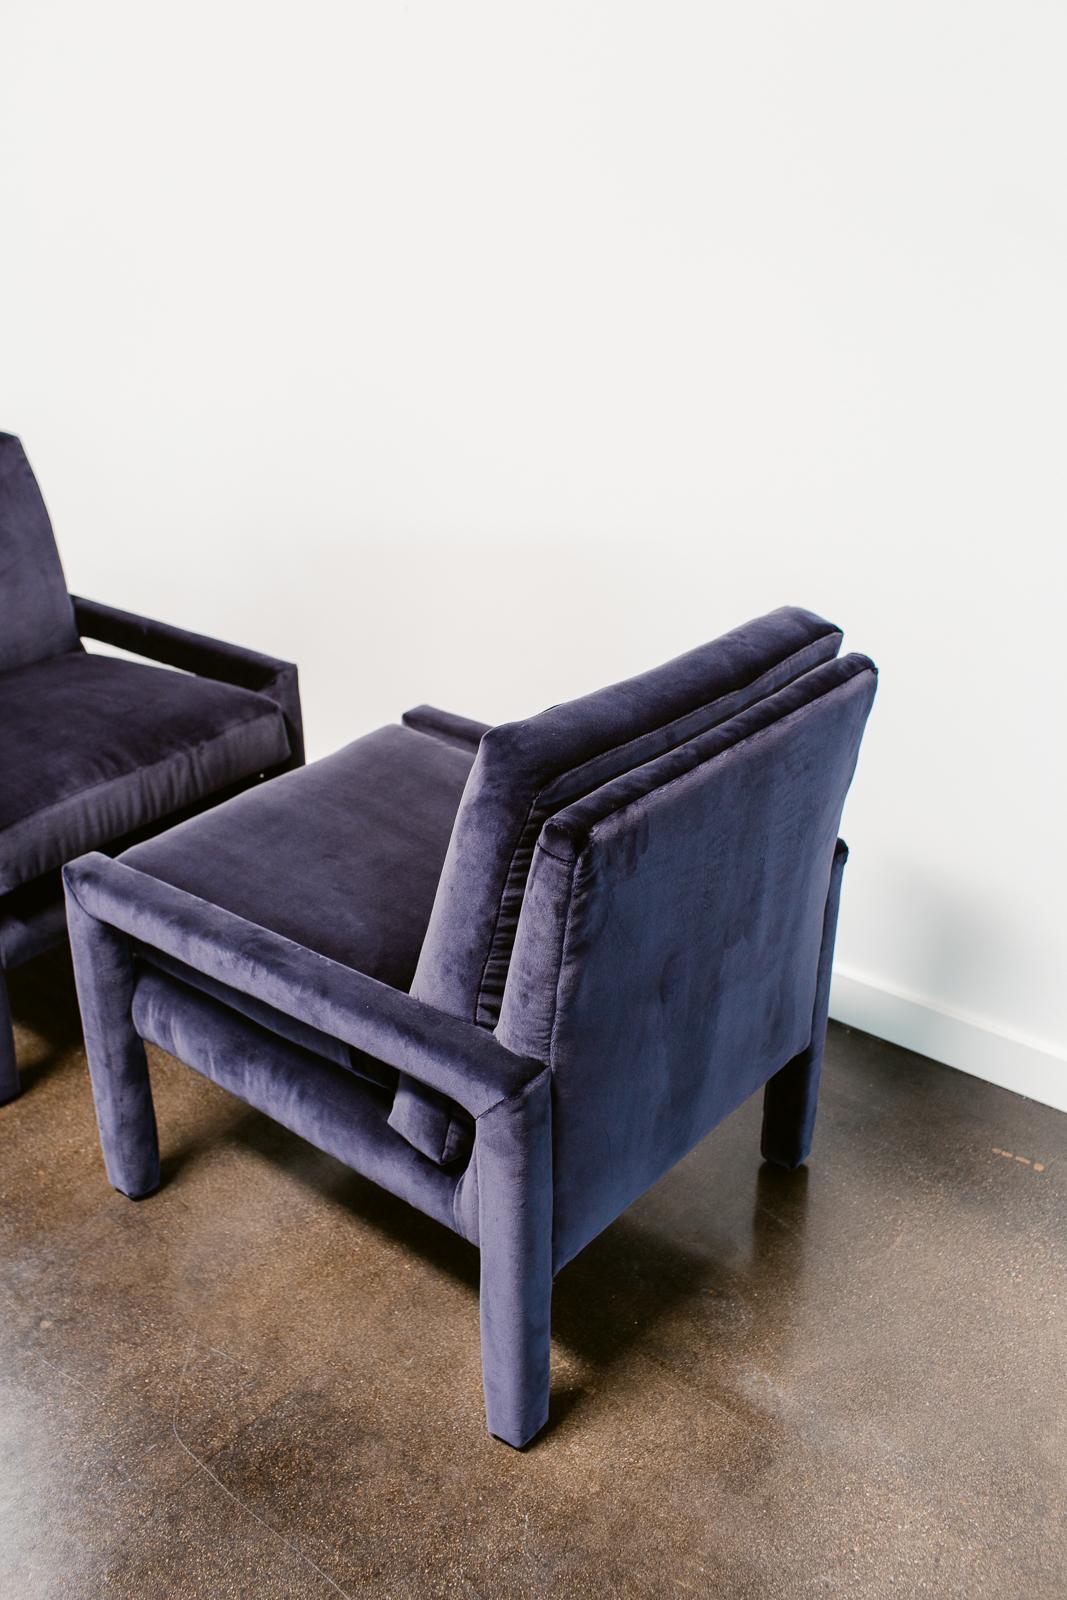 A pair of Milo Baughman Parson chairs reupholstered in a Holly Hunt velvet and restored with new high density foam cushions. These fully upholstered vintage armchairs are elegantly simple in line yet comfortable and functional. 

About Milo